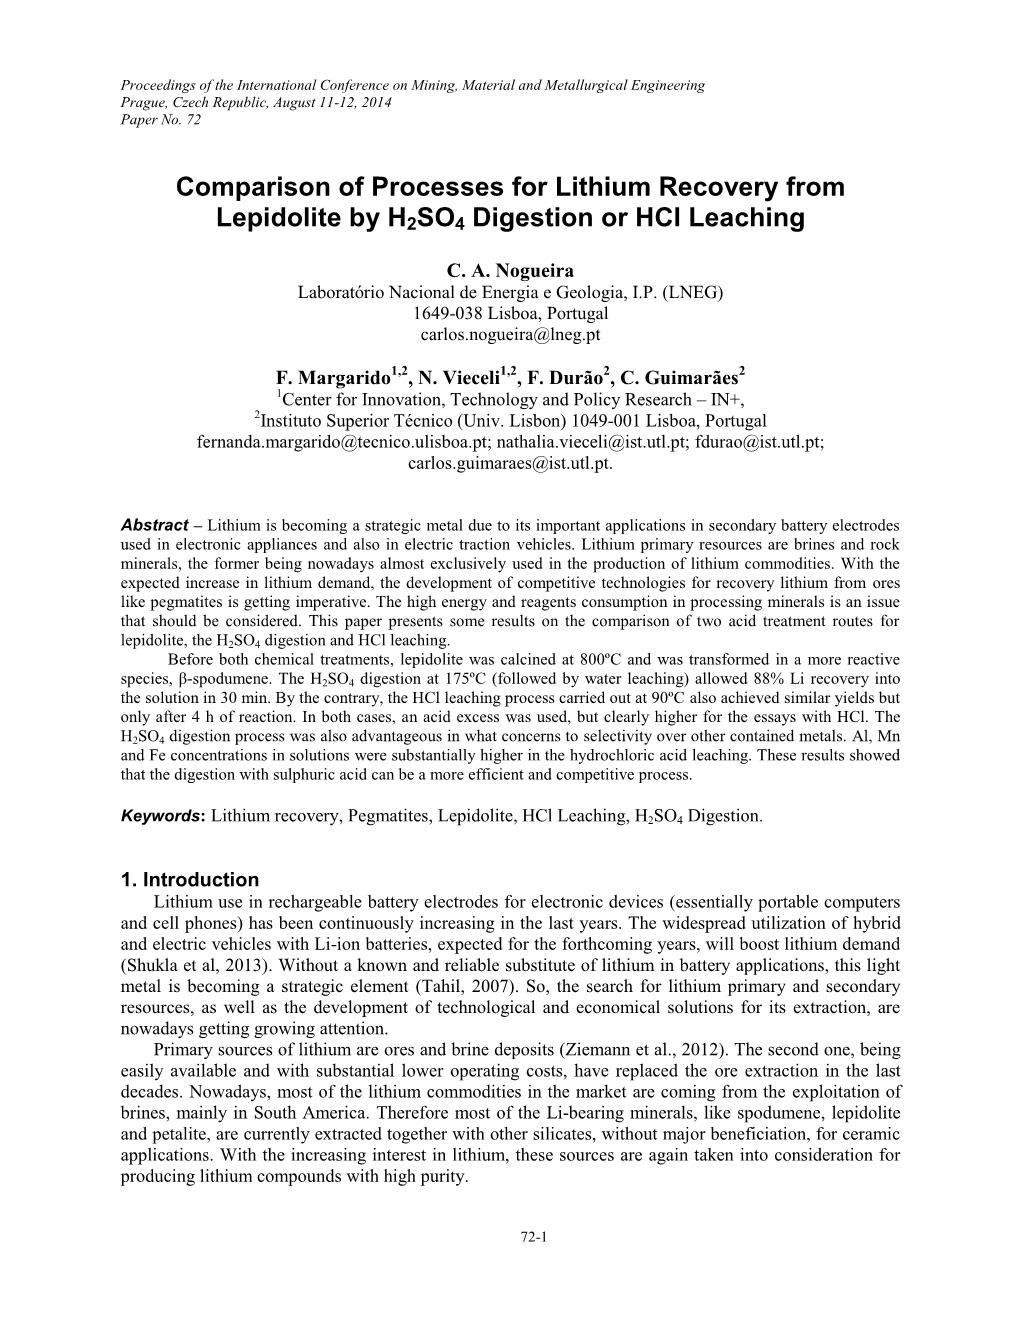 Comparison of Processes for Lithium Recovery from Lepidolite by H2SO4 Digestion Or Hcl Leaching